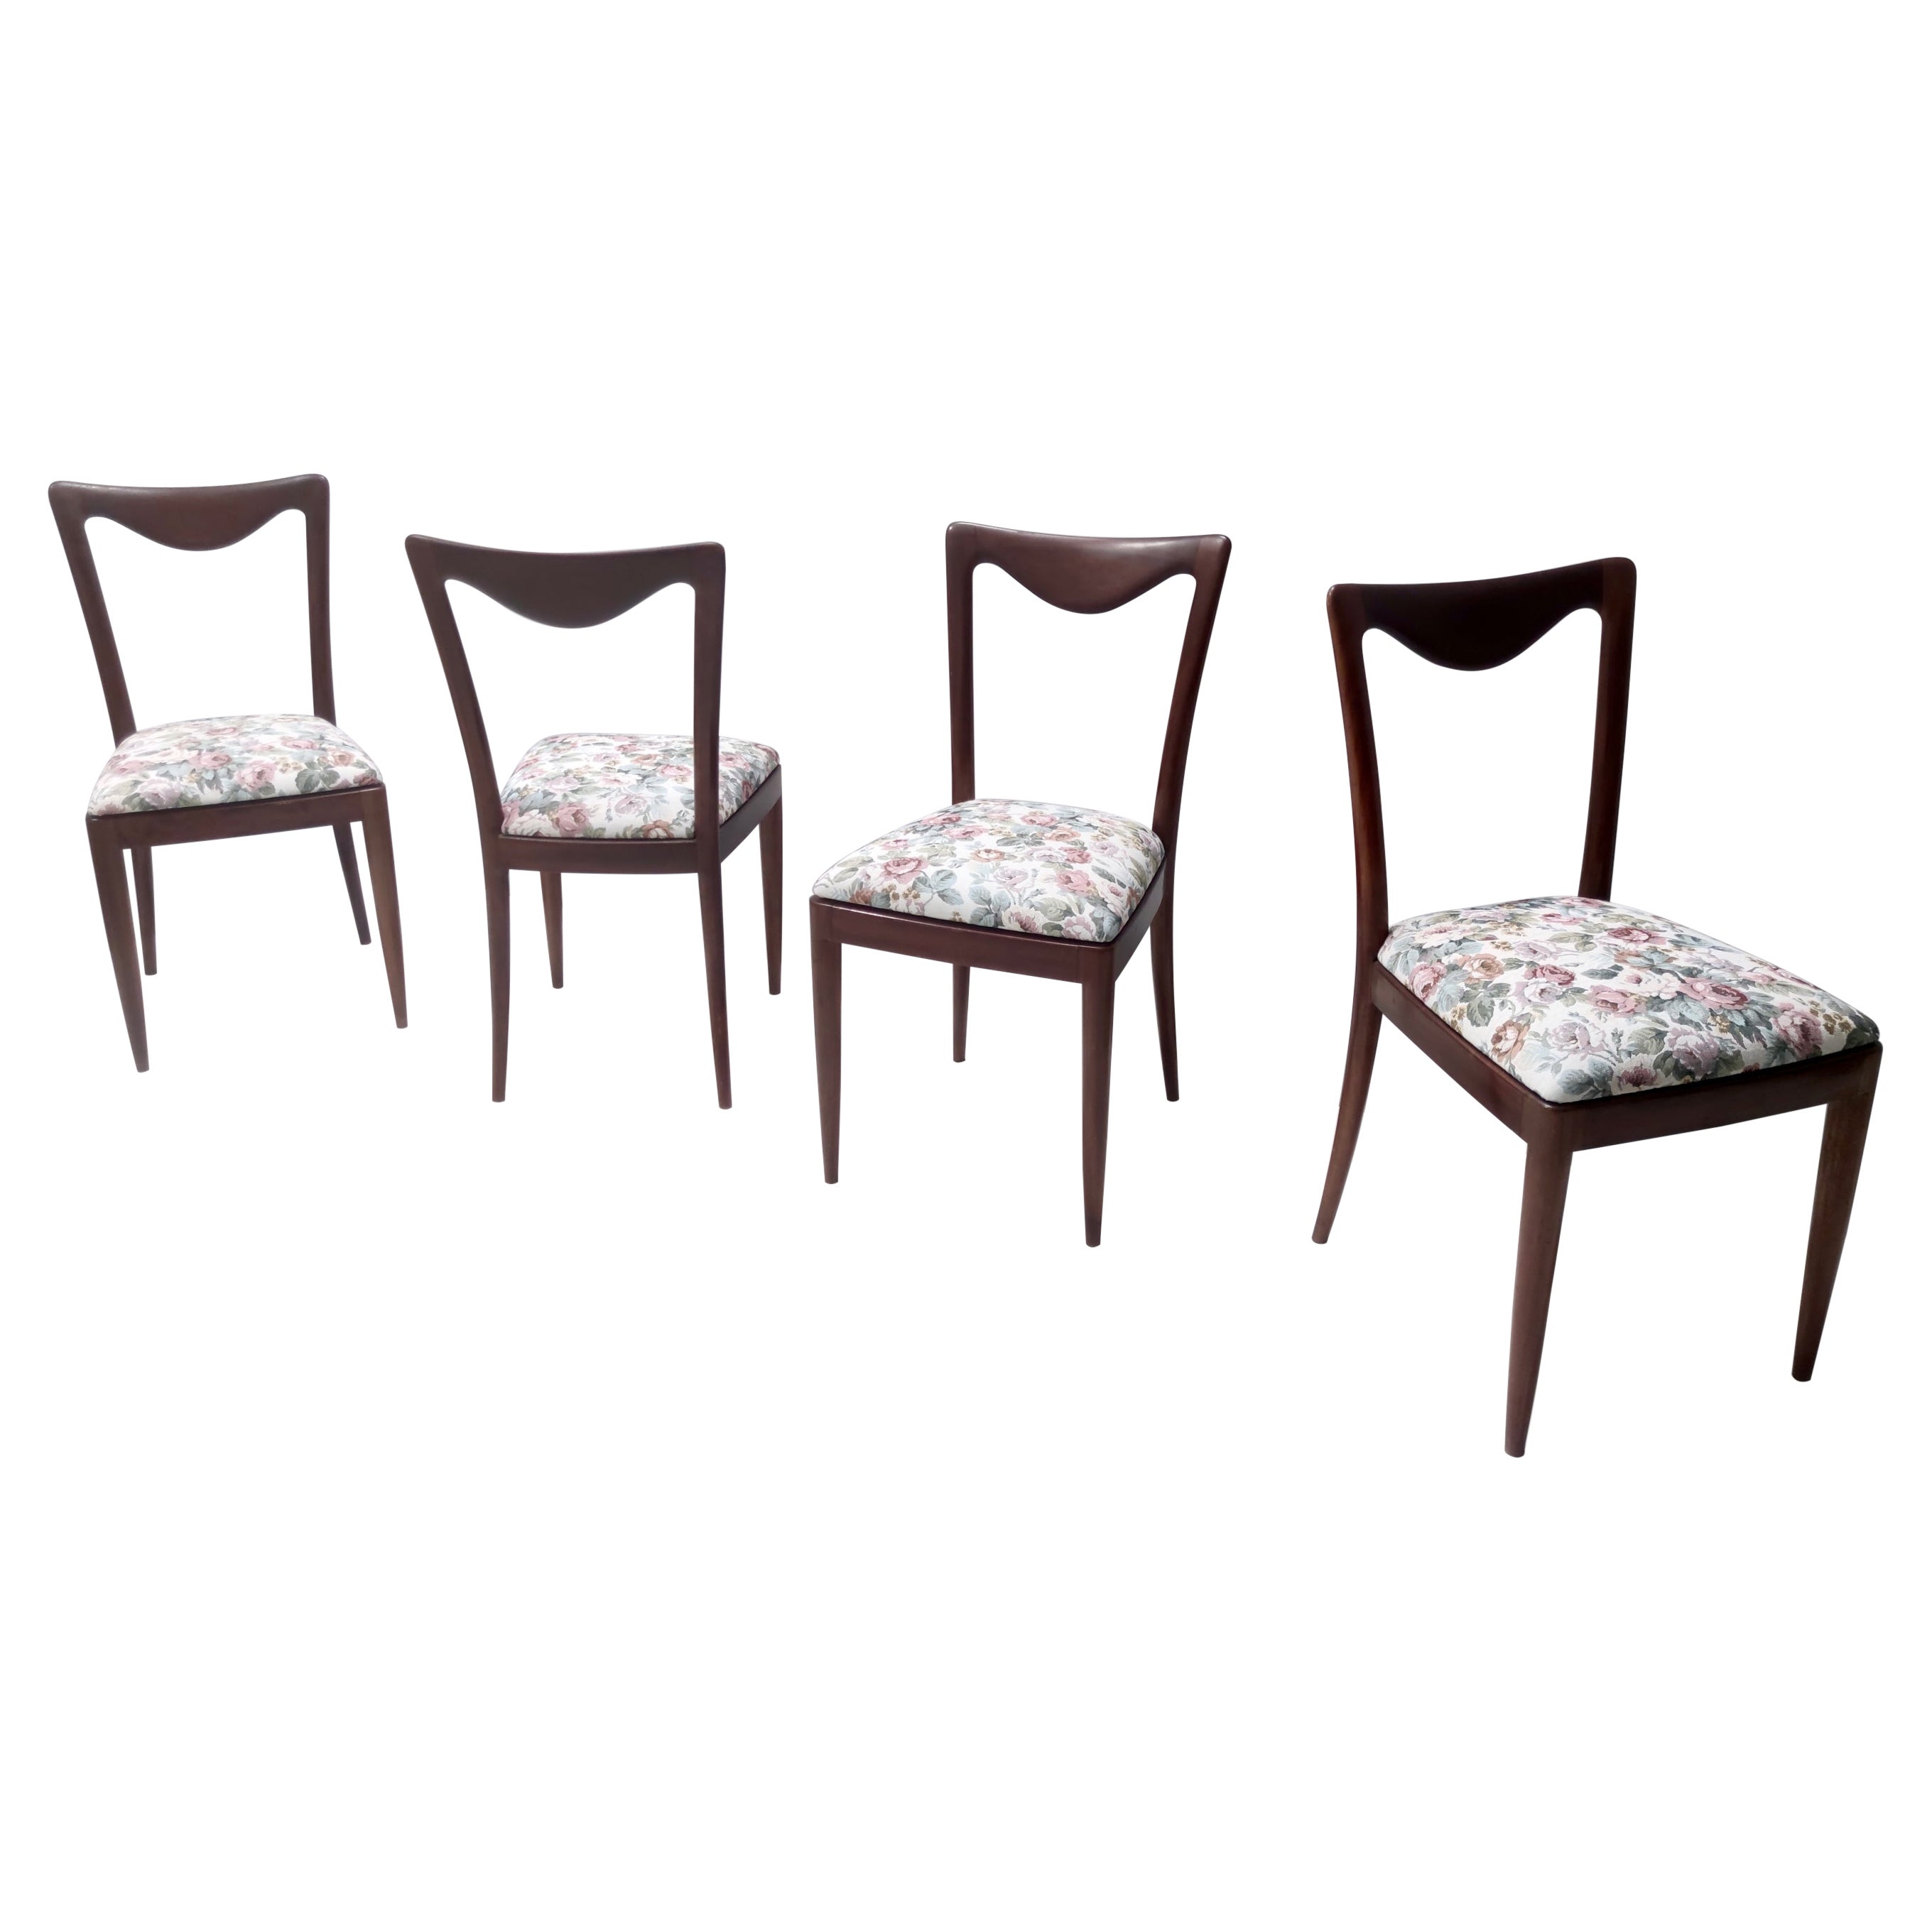 Four Chairs by Carlo Enrico Rava with Beech Frame and Linen Patterned Fabric For Sale